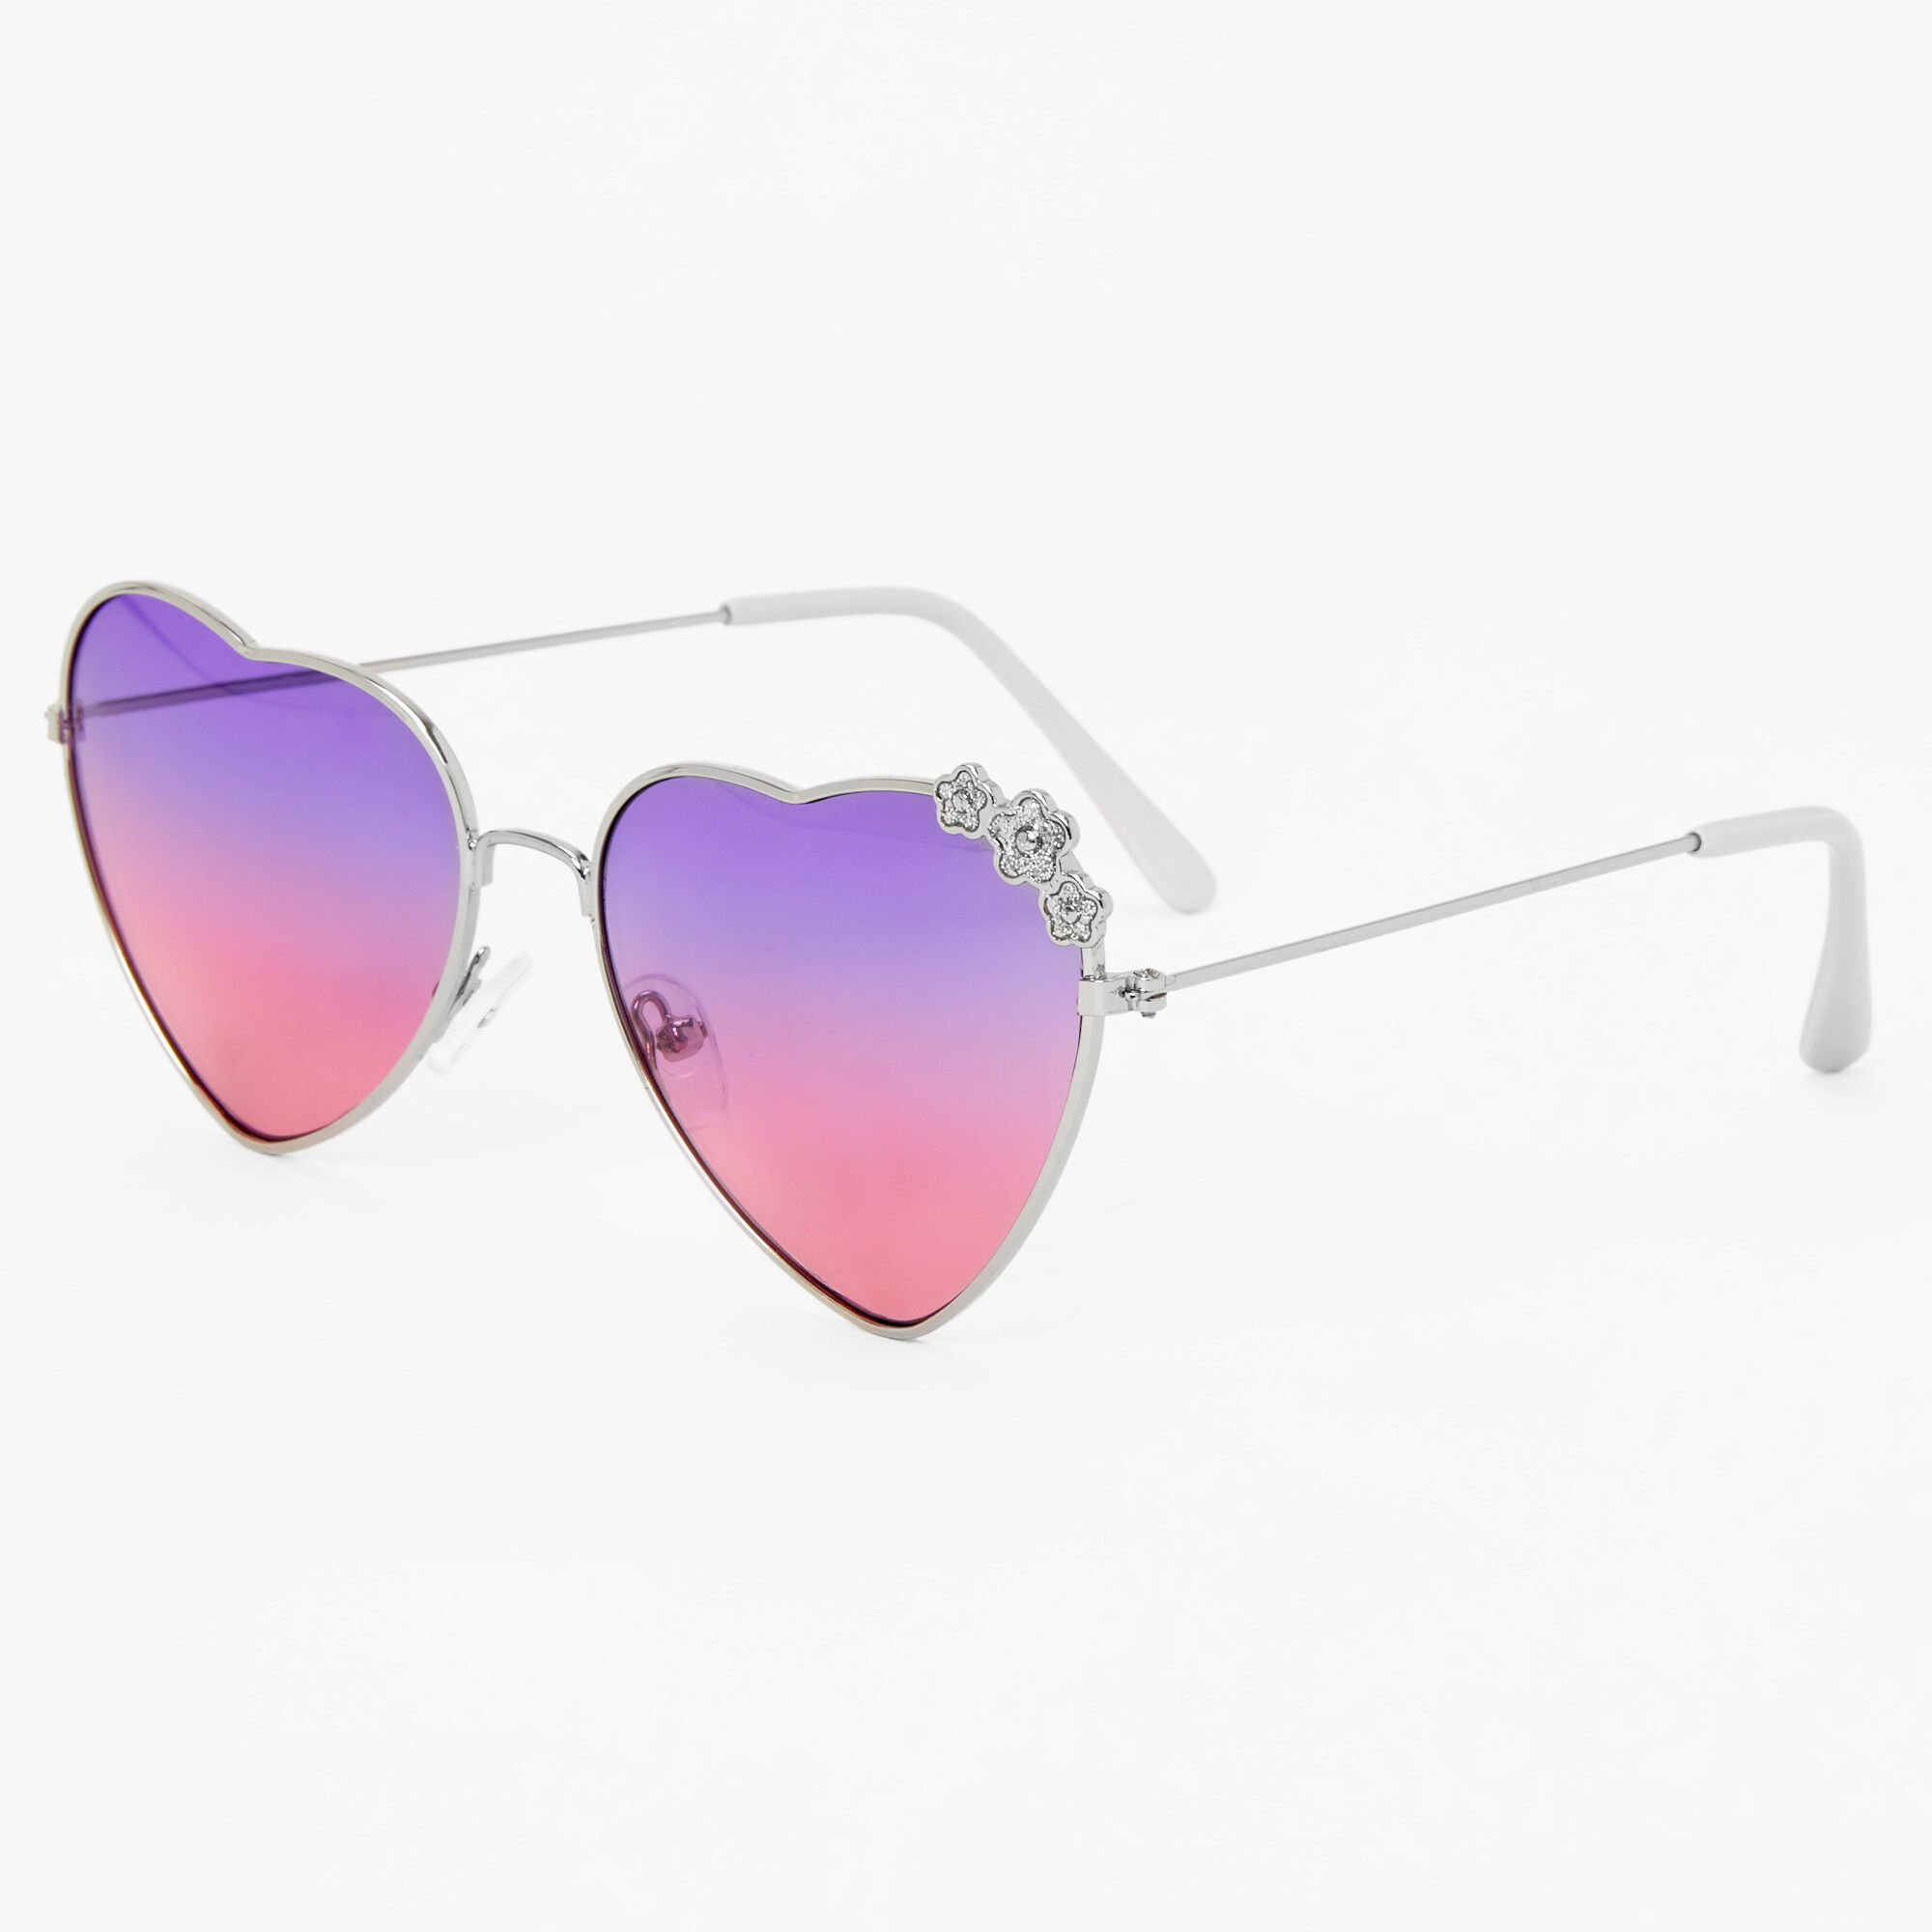 View Claires Club Purple Heart Aviator Sunglasses Pink information